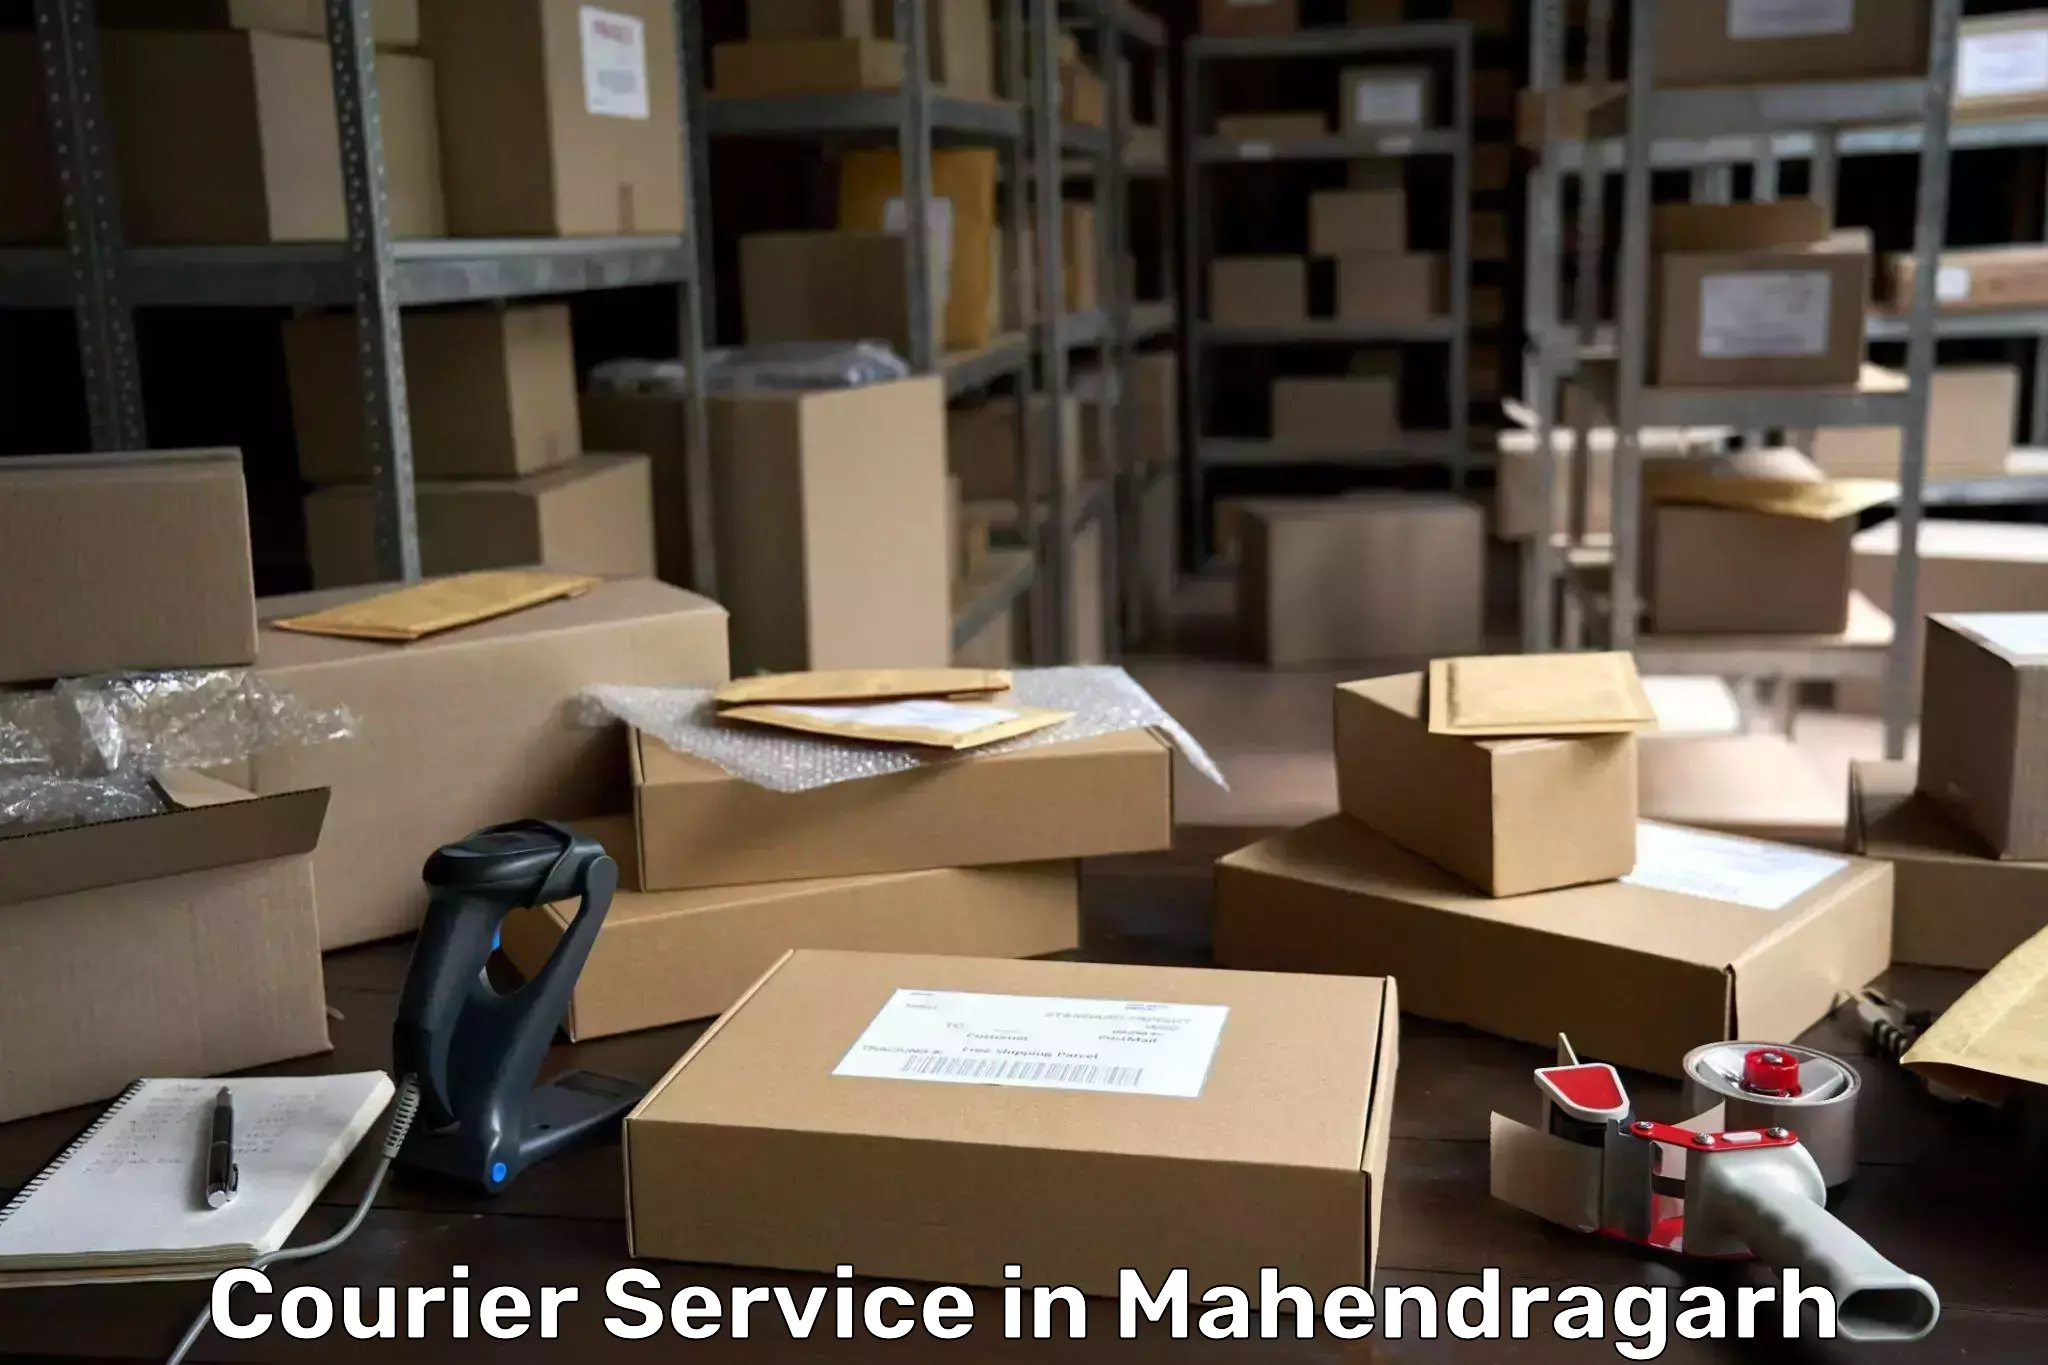 Flexible delivery scheduling in Mahendragarh